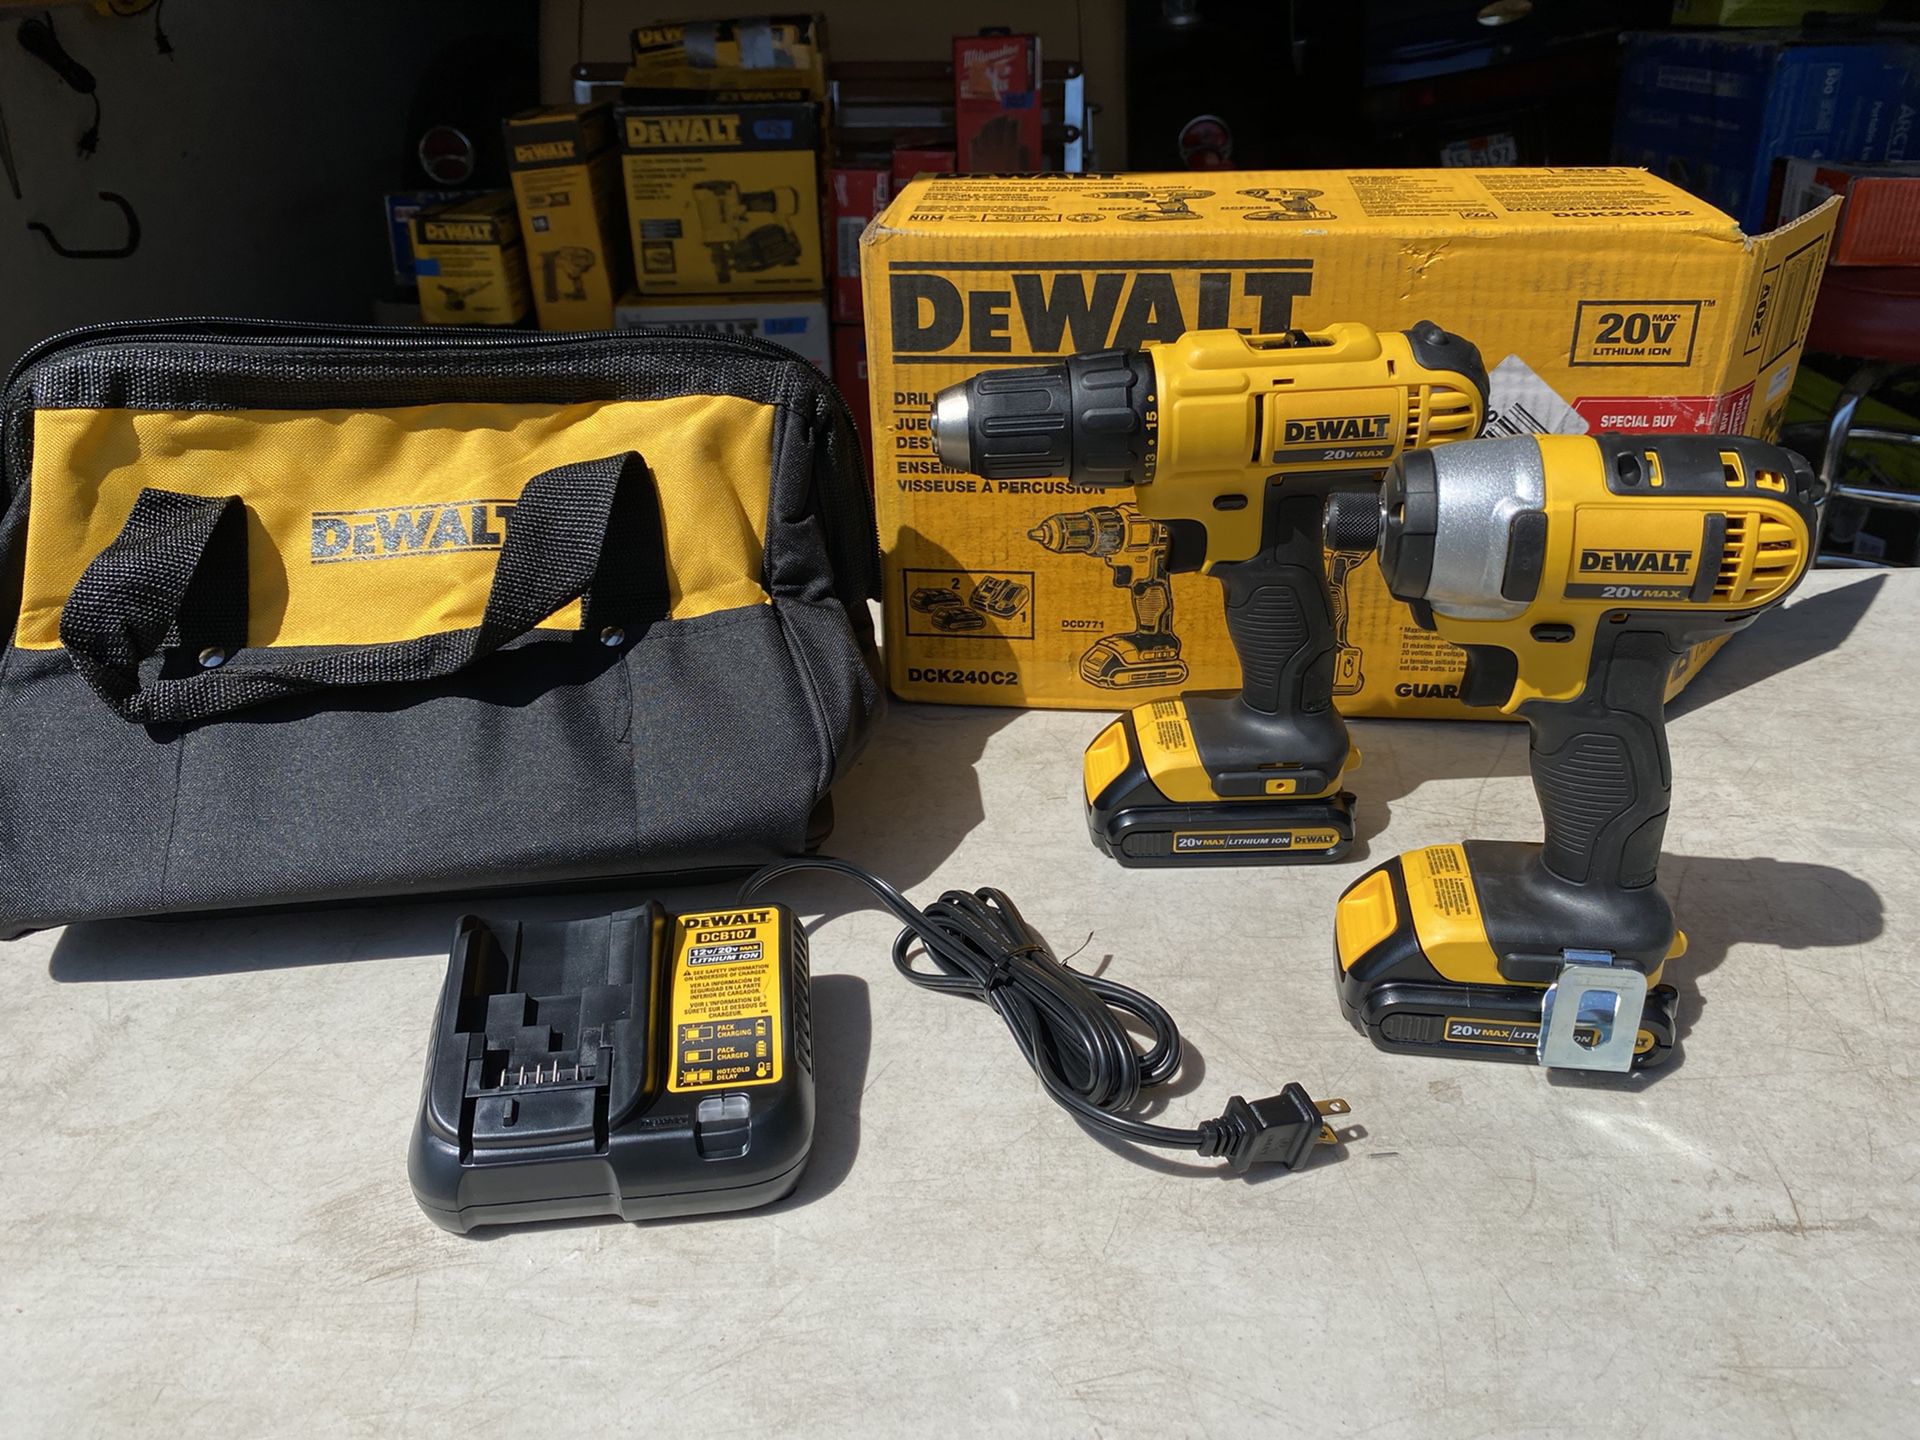 Dewalt Drill/Driver/ Impact Driver Combo Kit with 2 Batteries & Charger